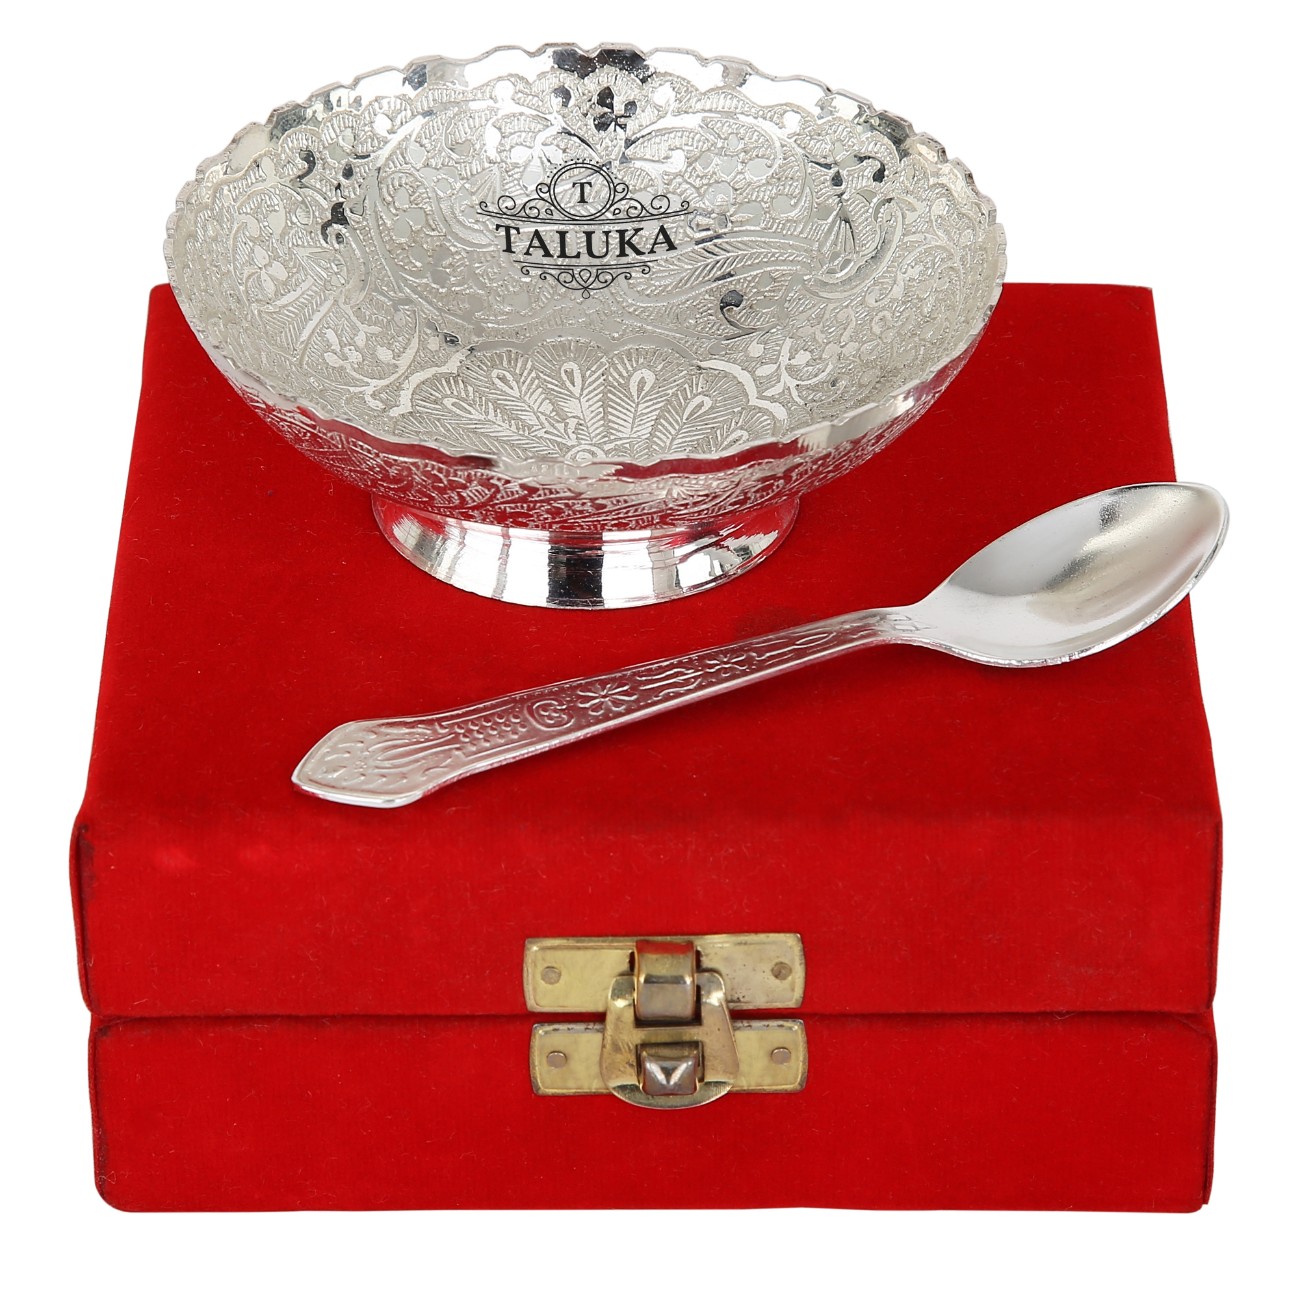 Silver Plated Desert Bowl, Spoon Set for Gifting, 4.5-inch Gift Box